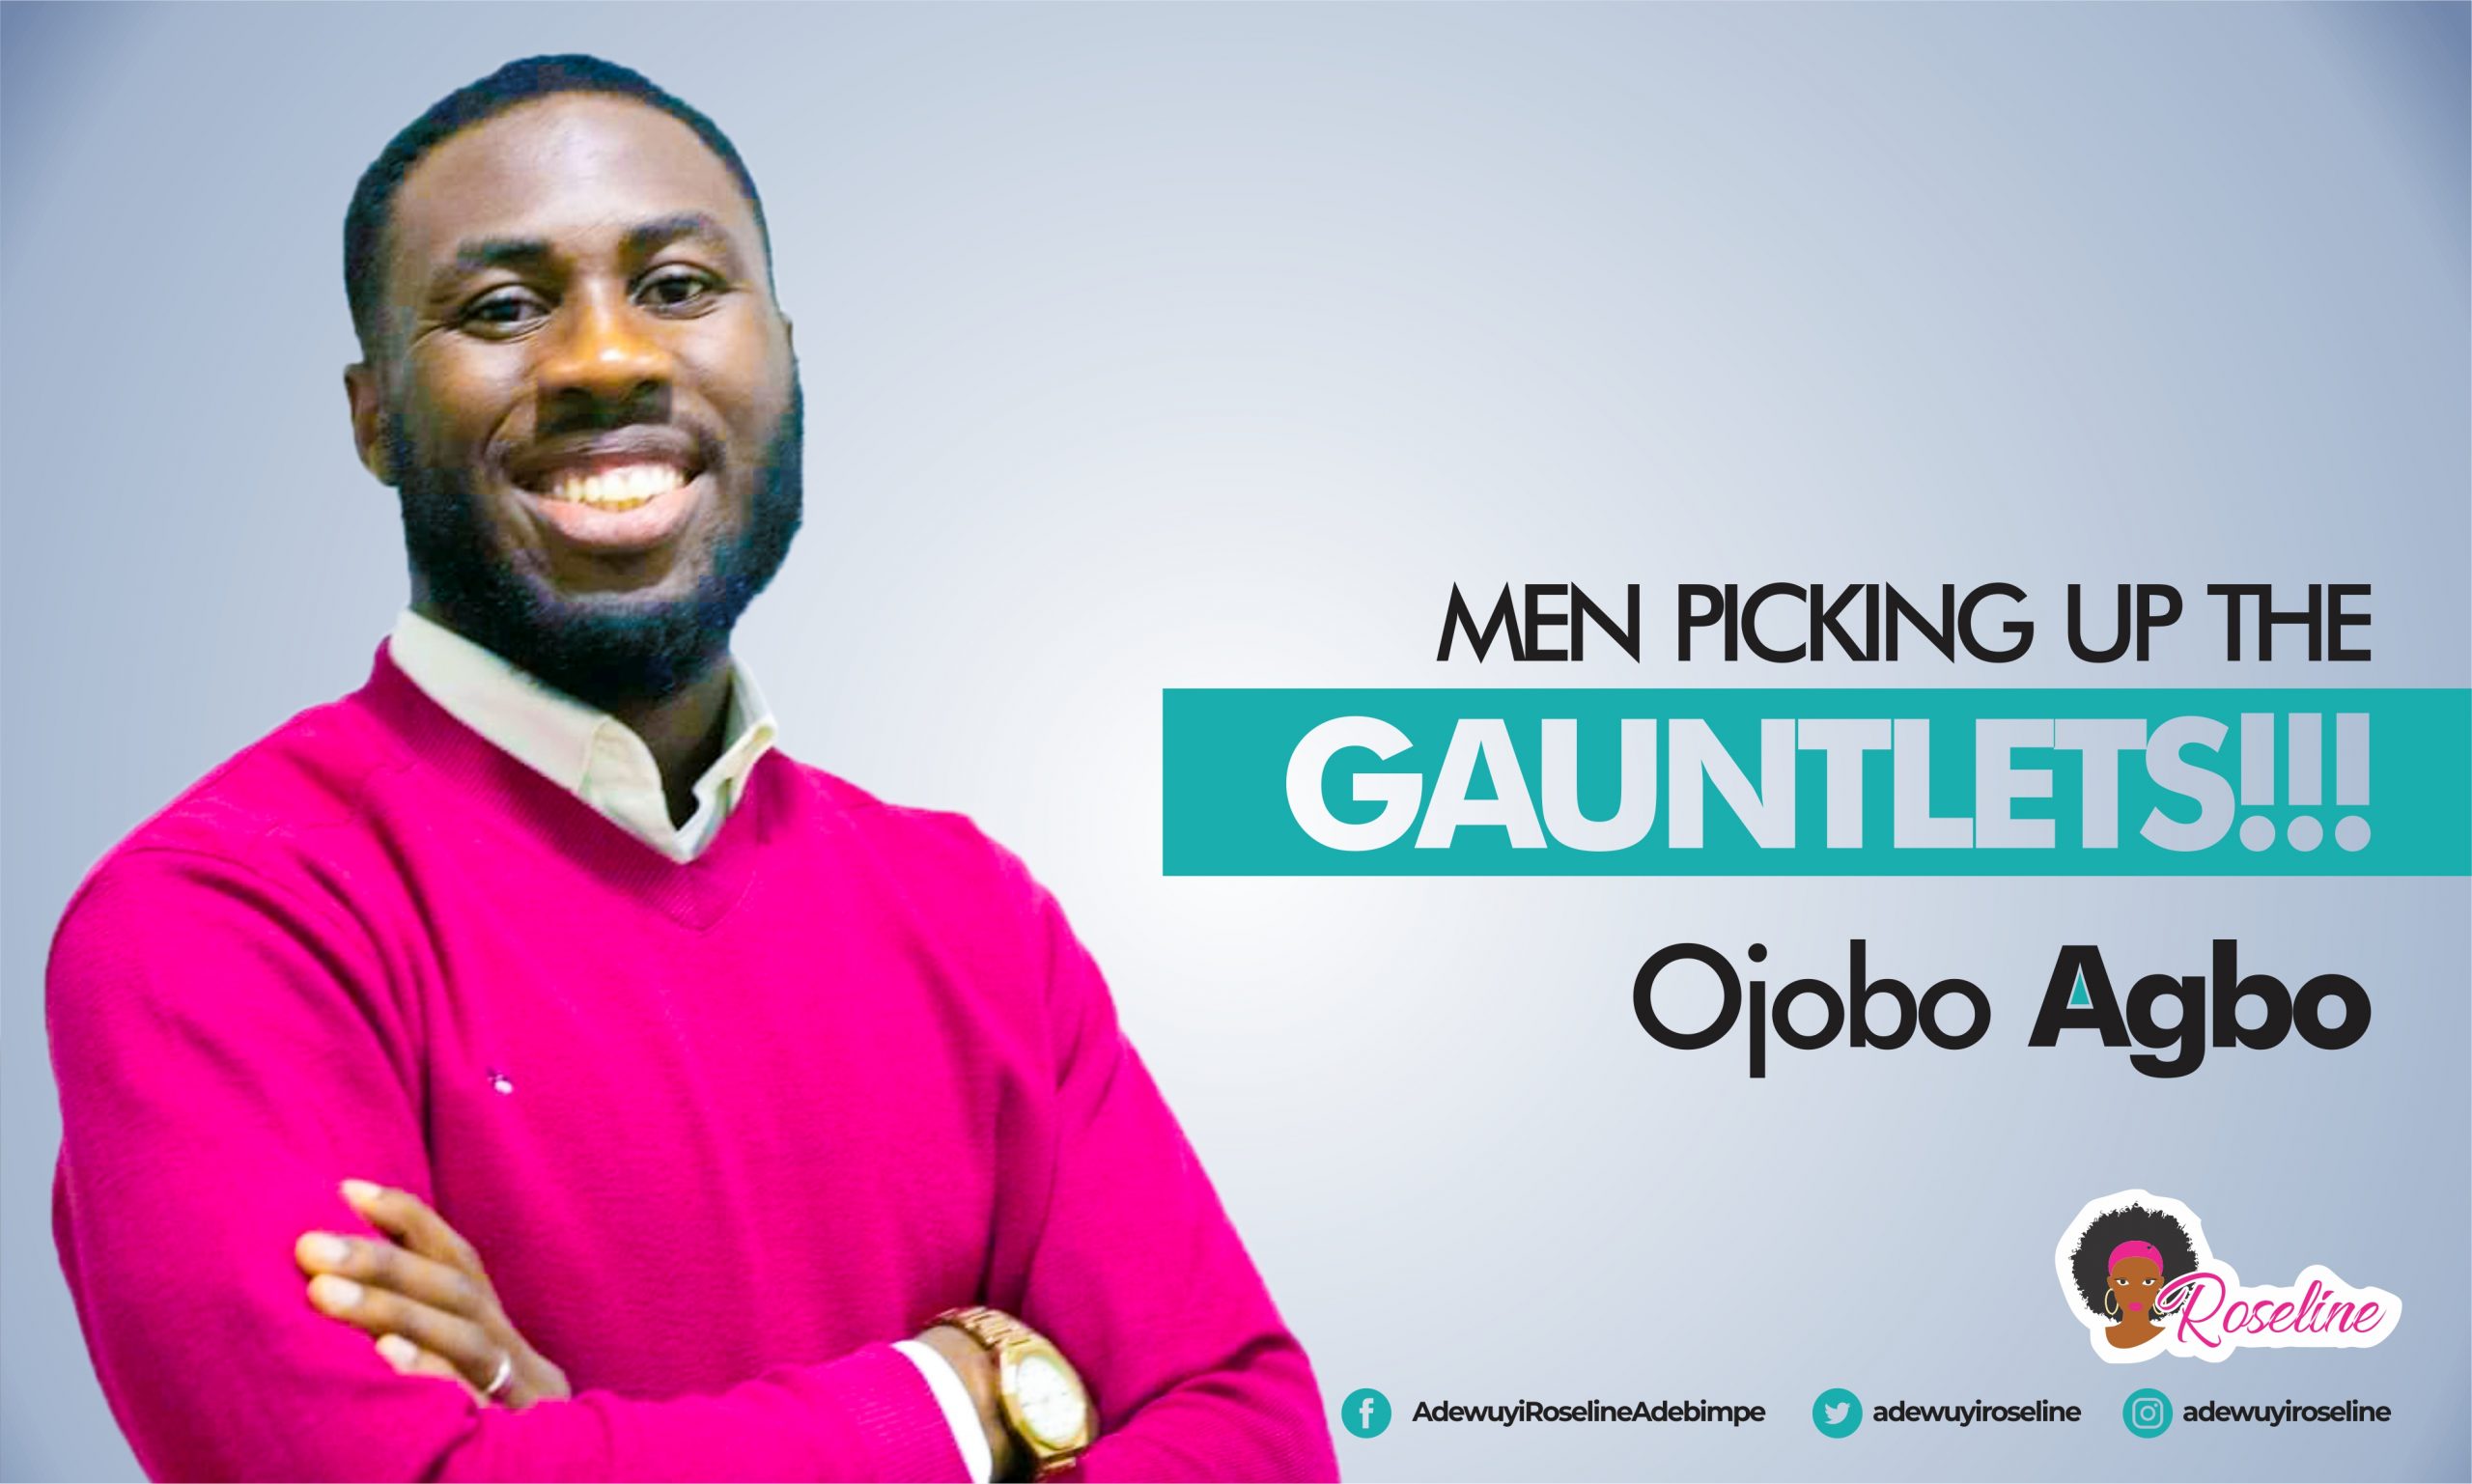 Men Picking Up The Gauntlet 7!!! – Ojobo Agbo